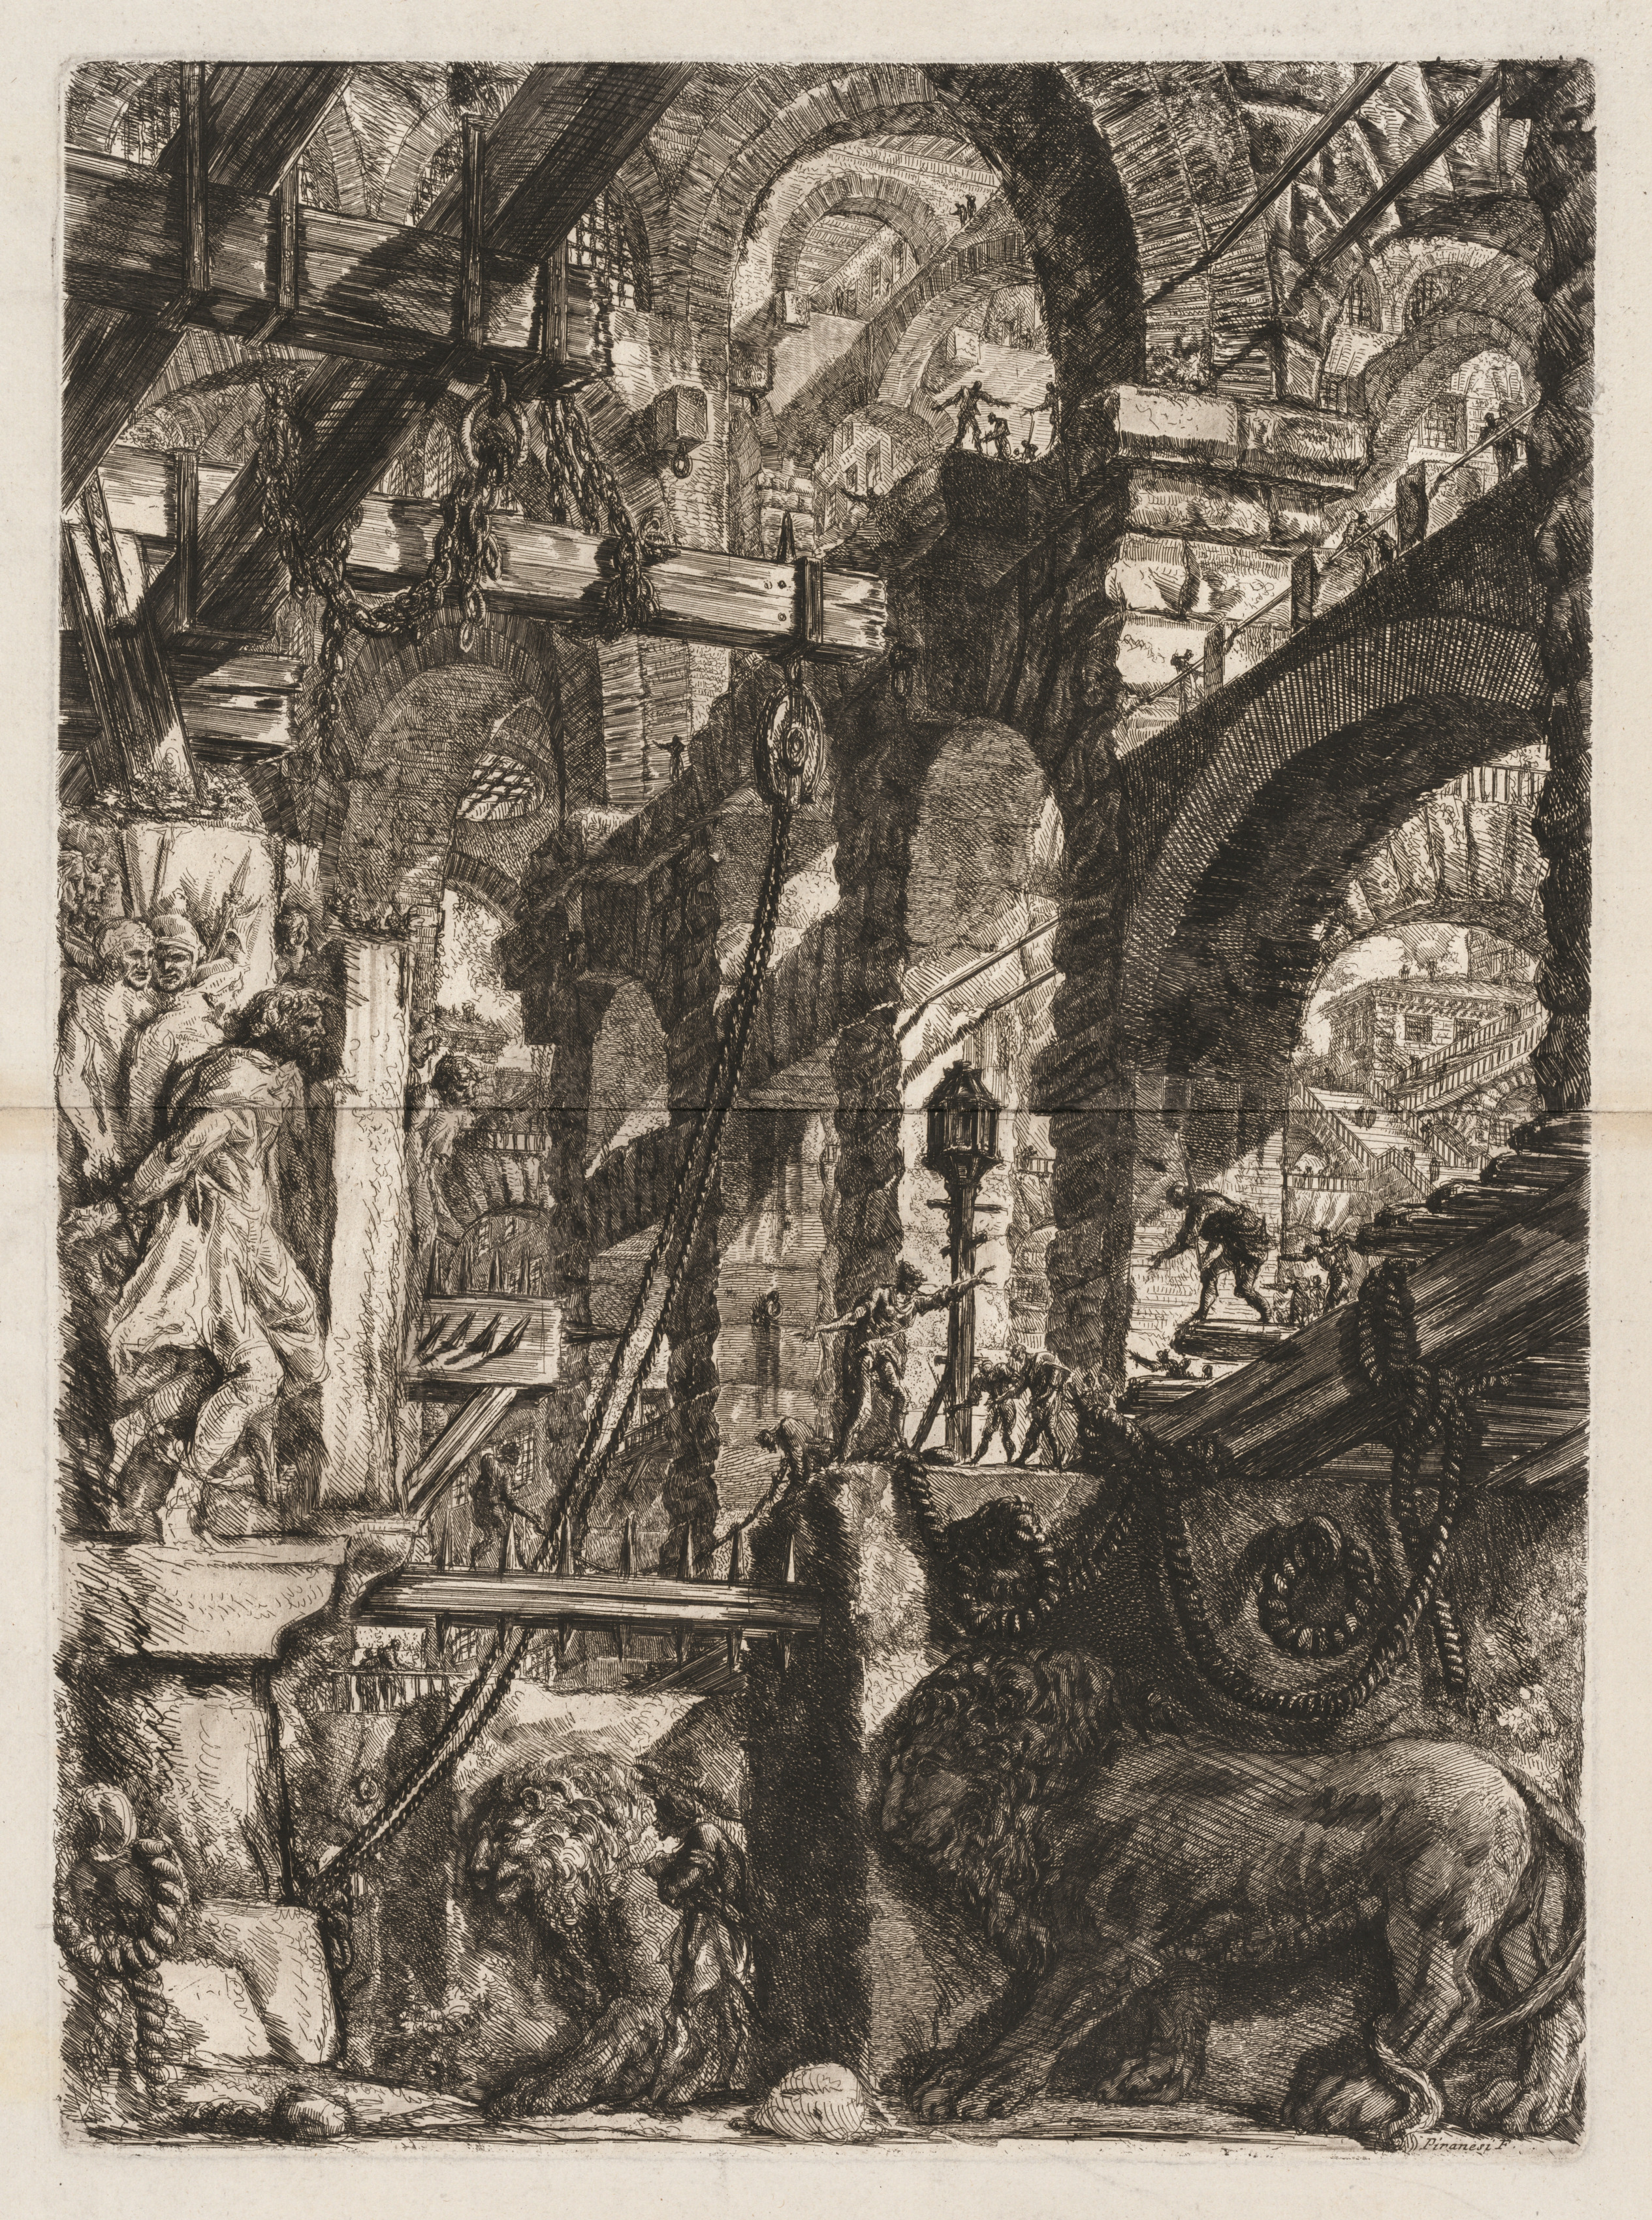 The Prisons:  A Perspective of Roman Arches, with Two Lions Carved in Relief on Stone Slabs in the Foreground